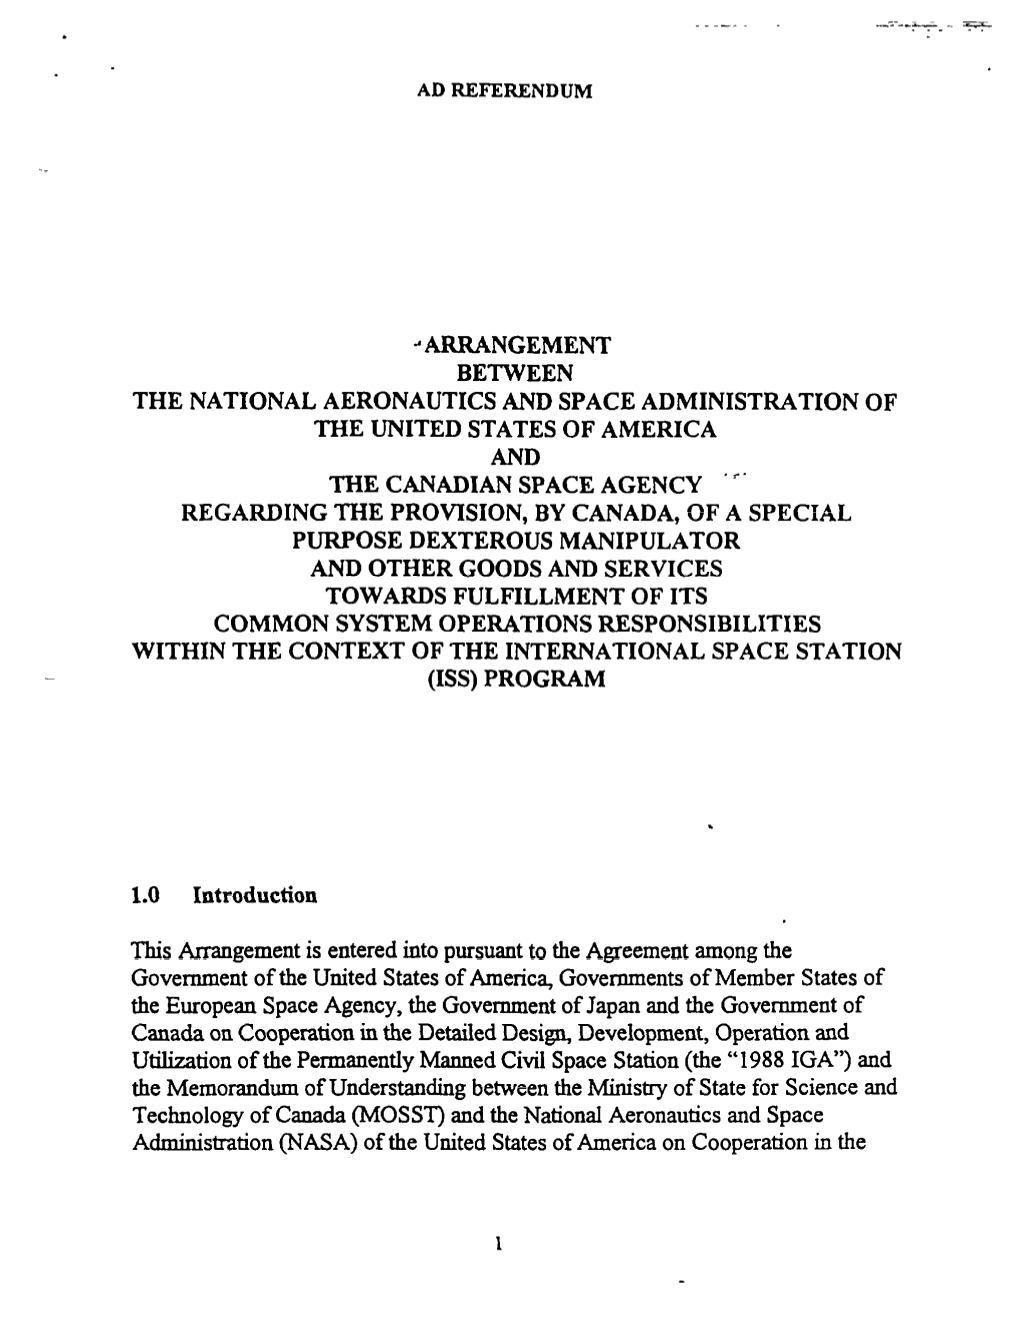 Arrangement Between the National Aeronautics and Space Administration of the United States of America and T’He Canadian Space Agency ’ C